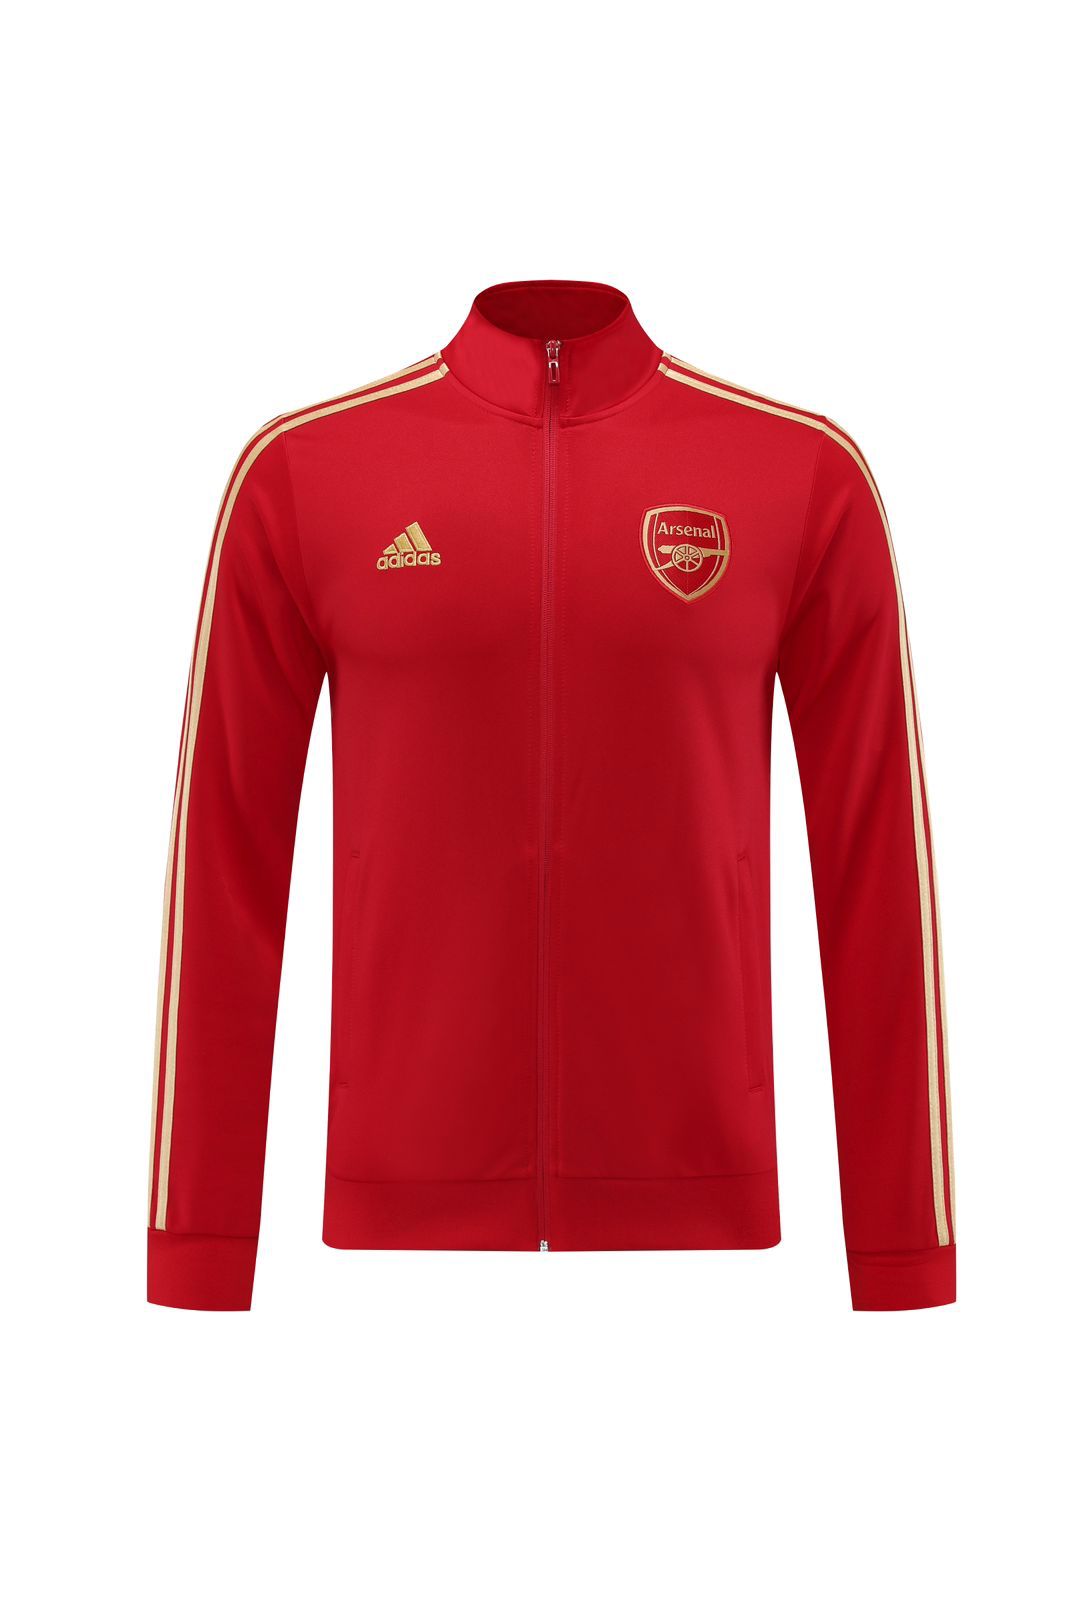 Arsenal Red Jacket 23/24 Edition